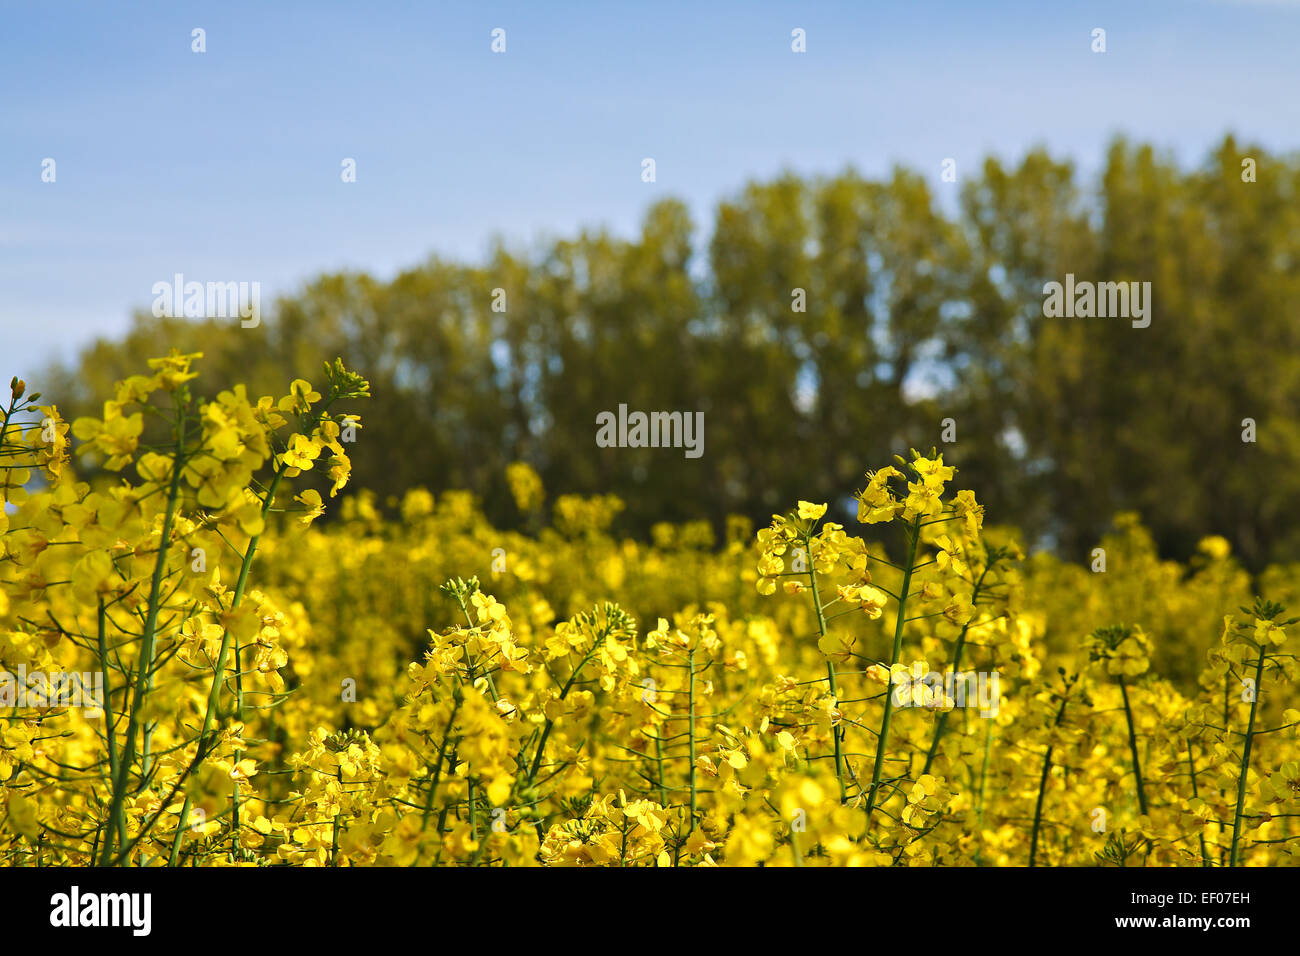 On the edge of a rapeseed field Stock Photo